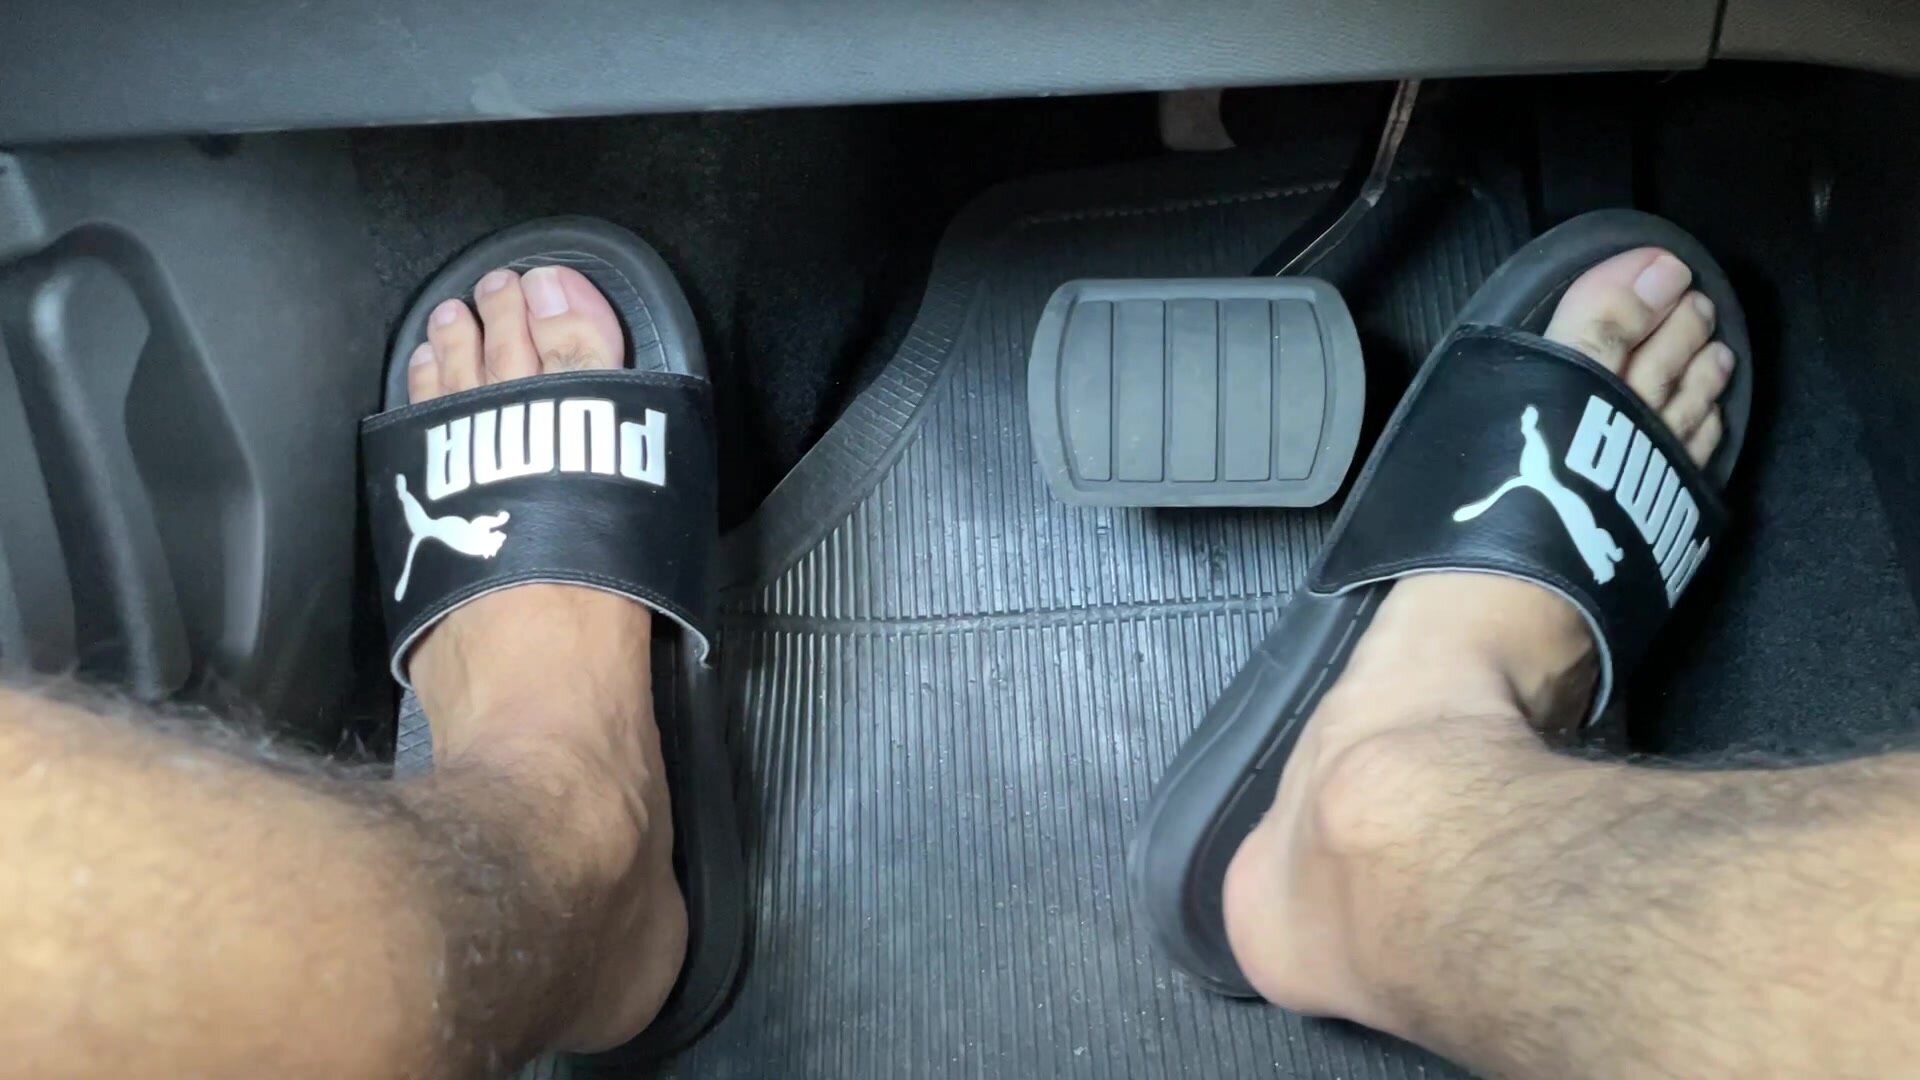 Male pedal pumping with Puma slide